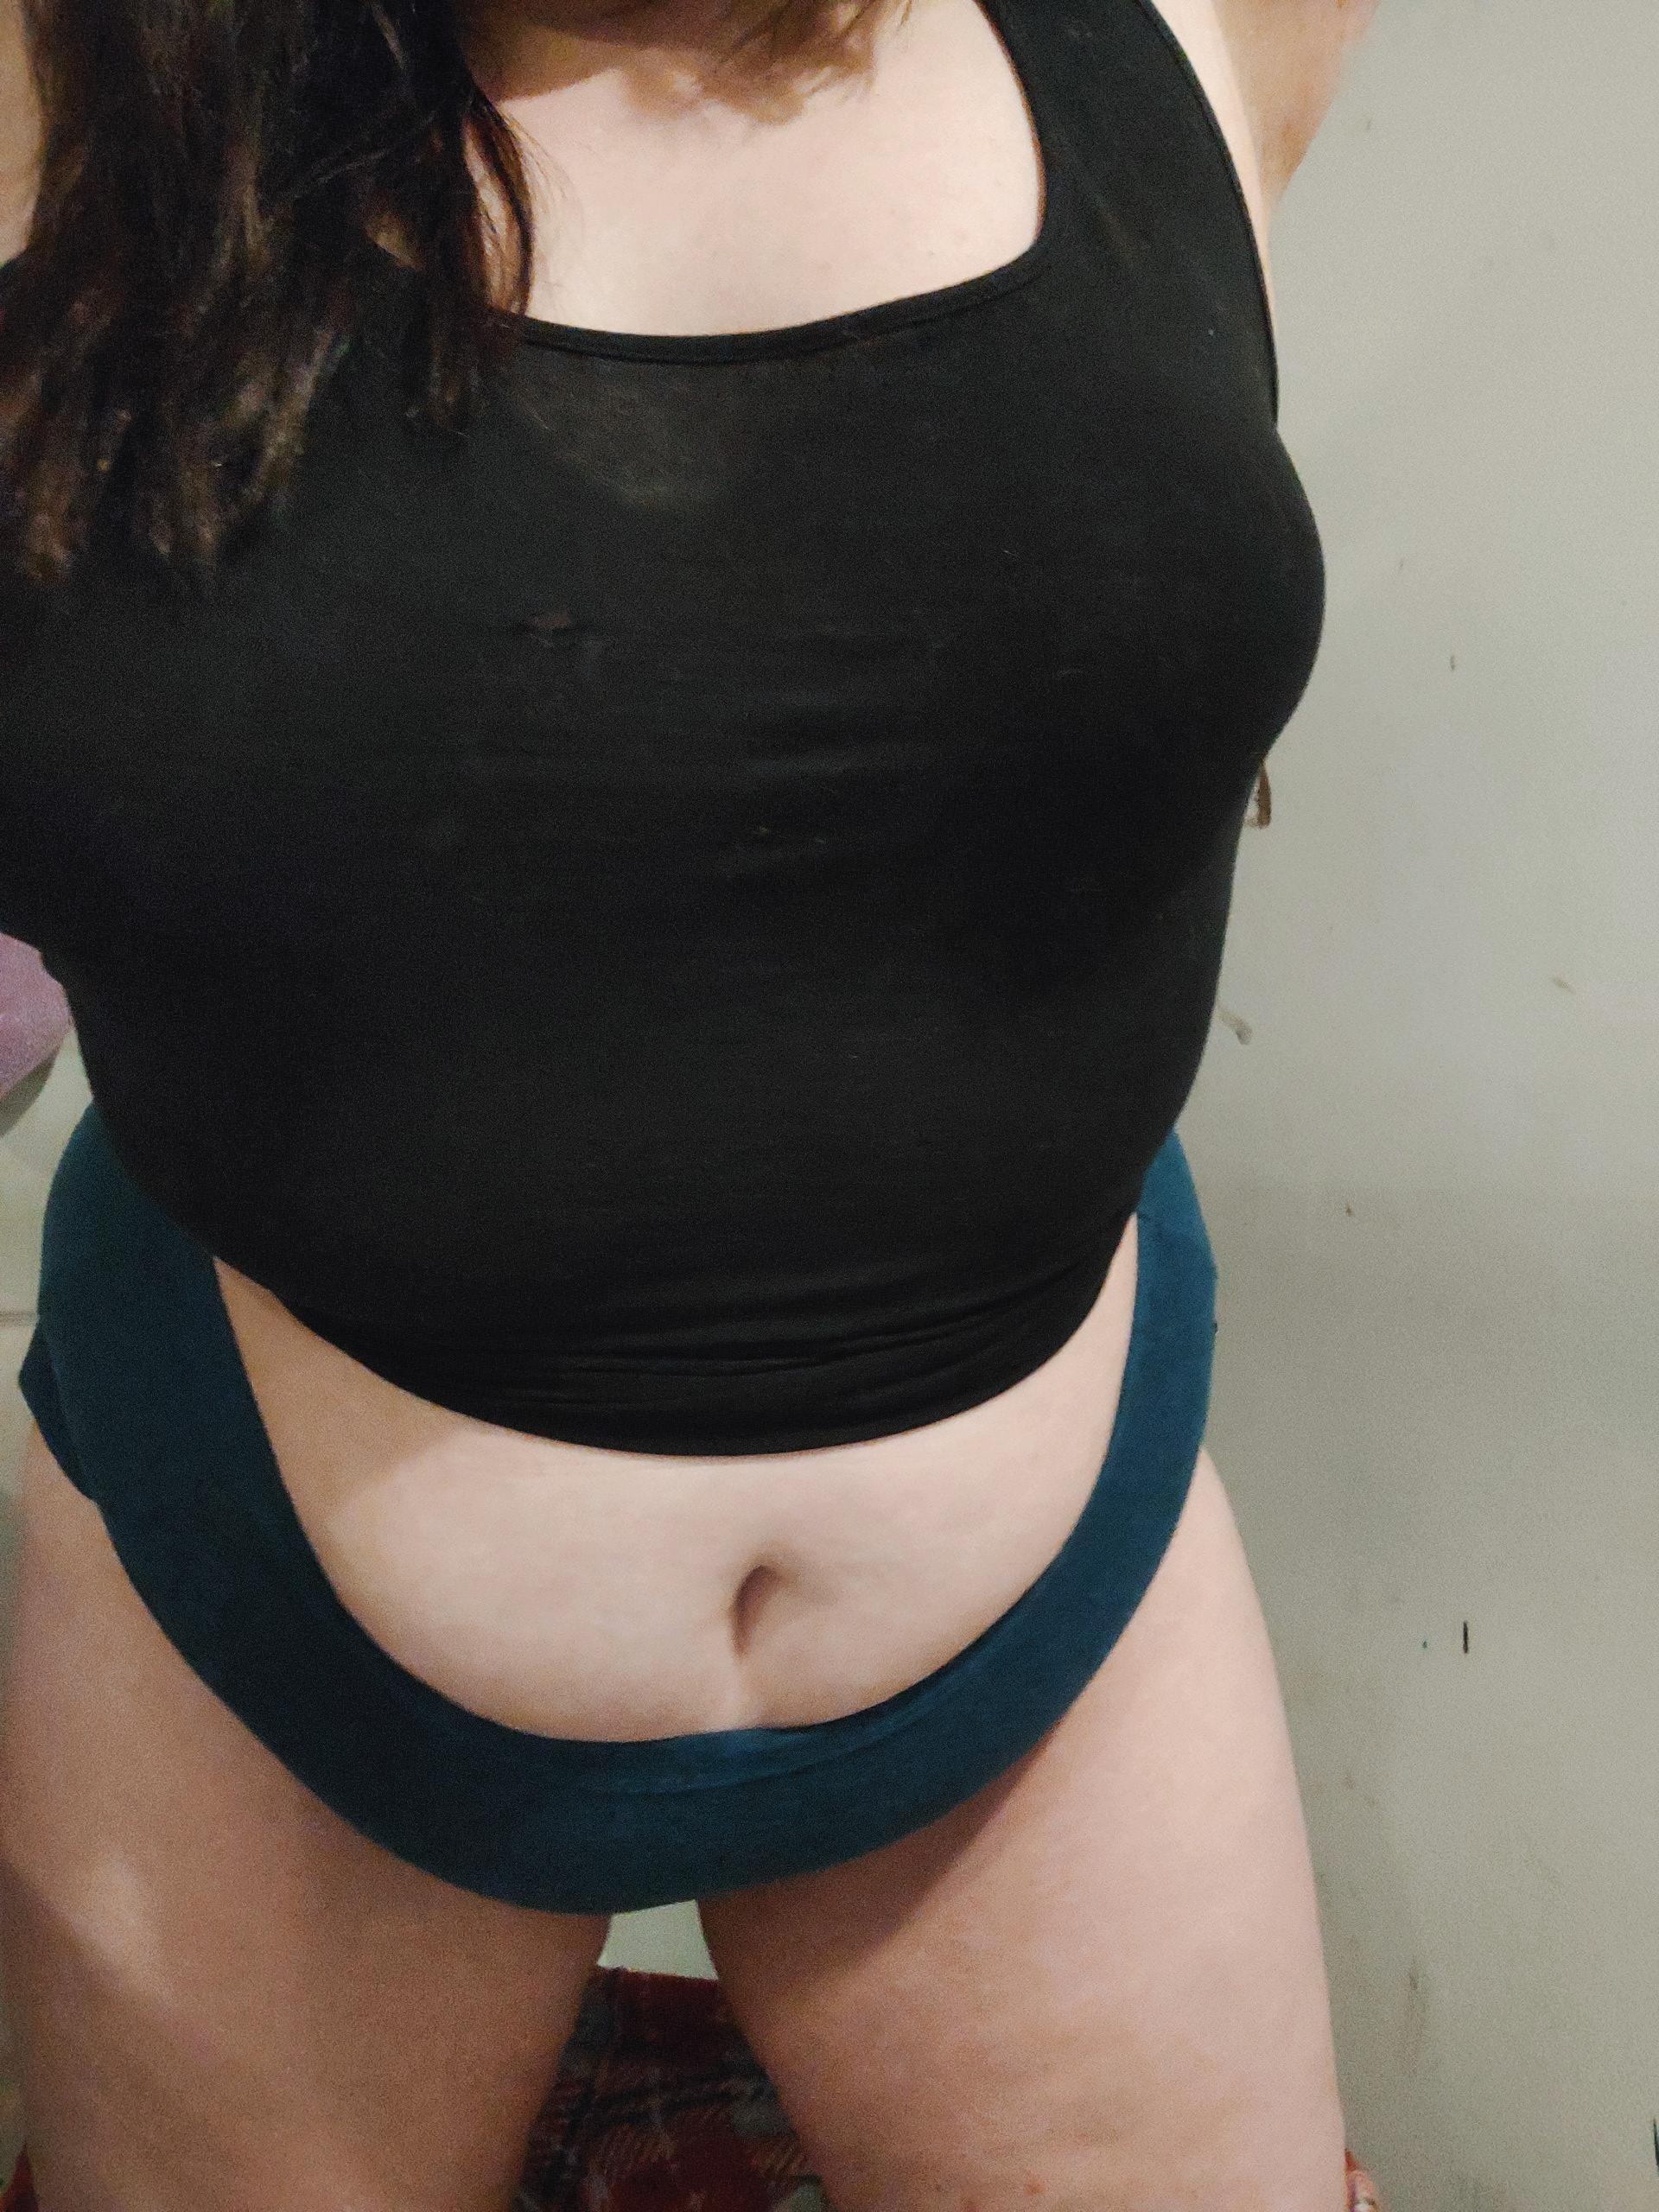 Do you like thick pale girls